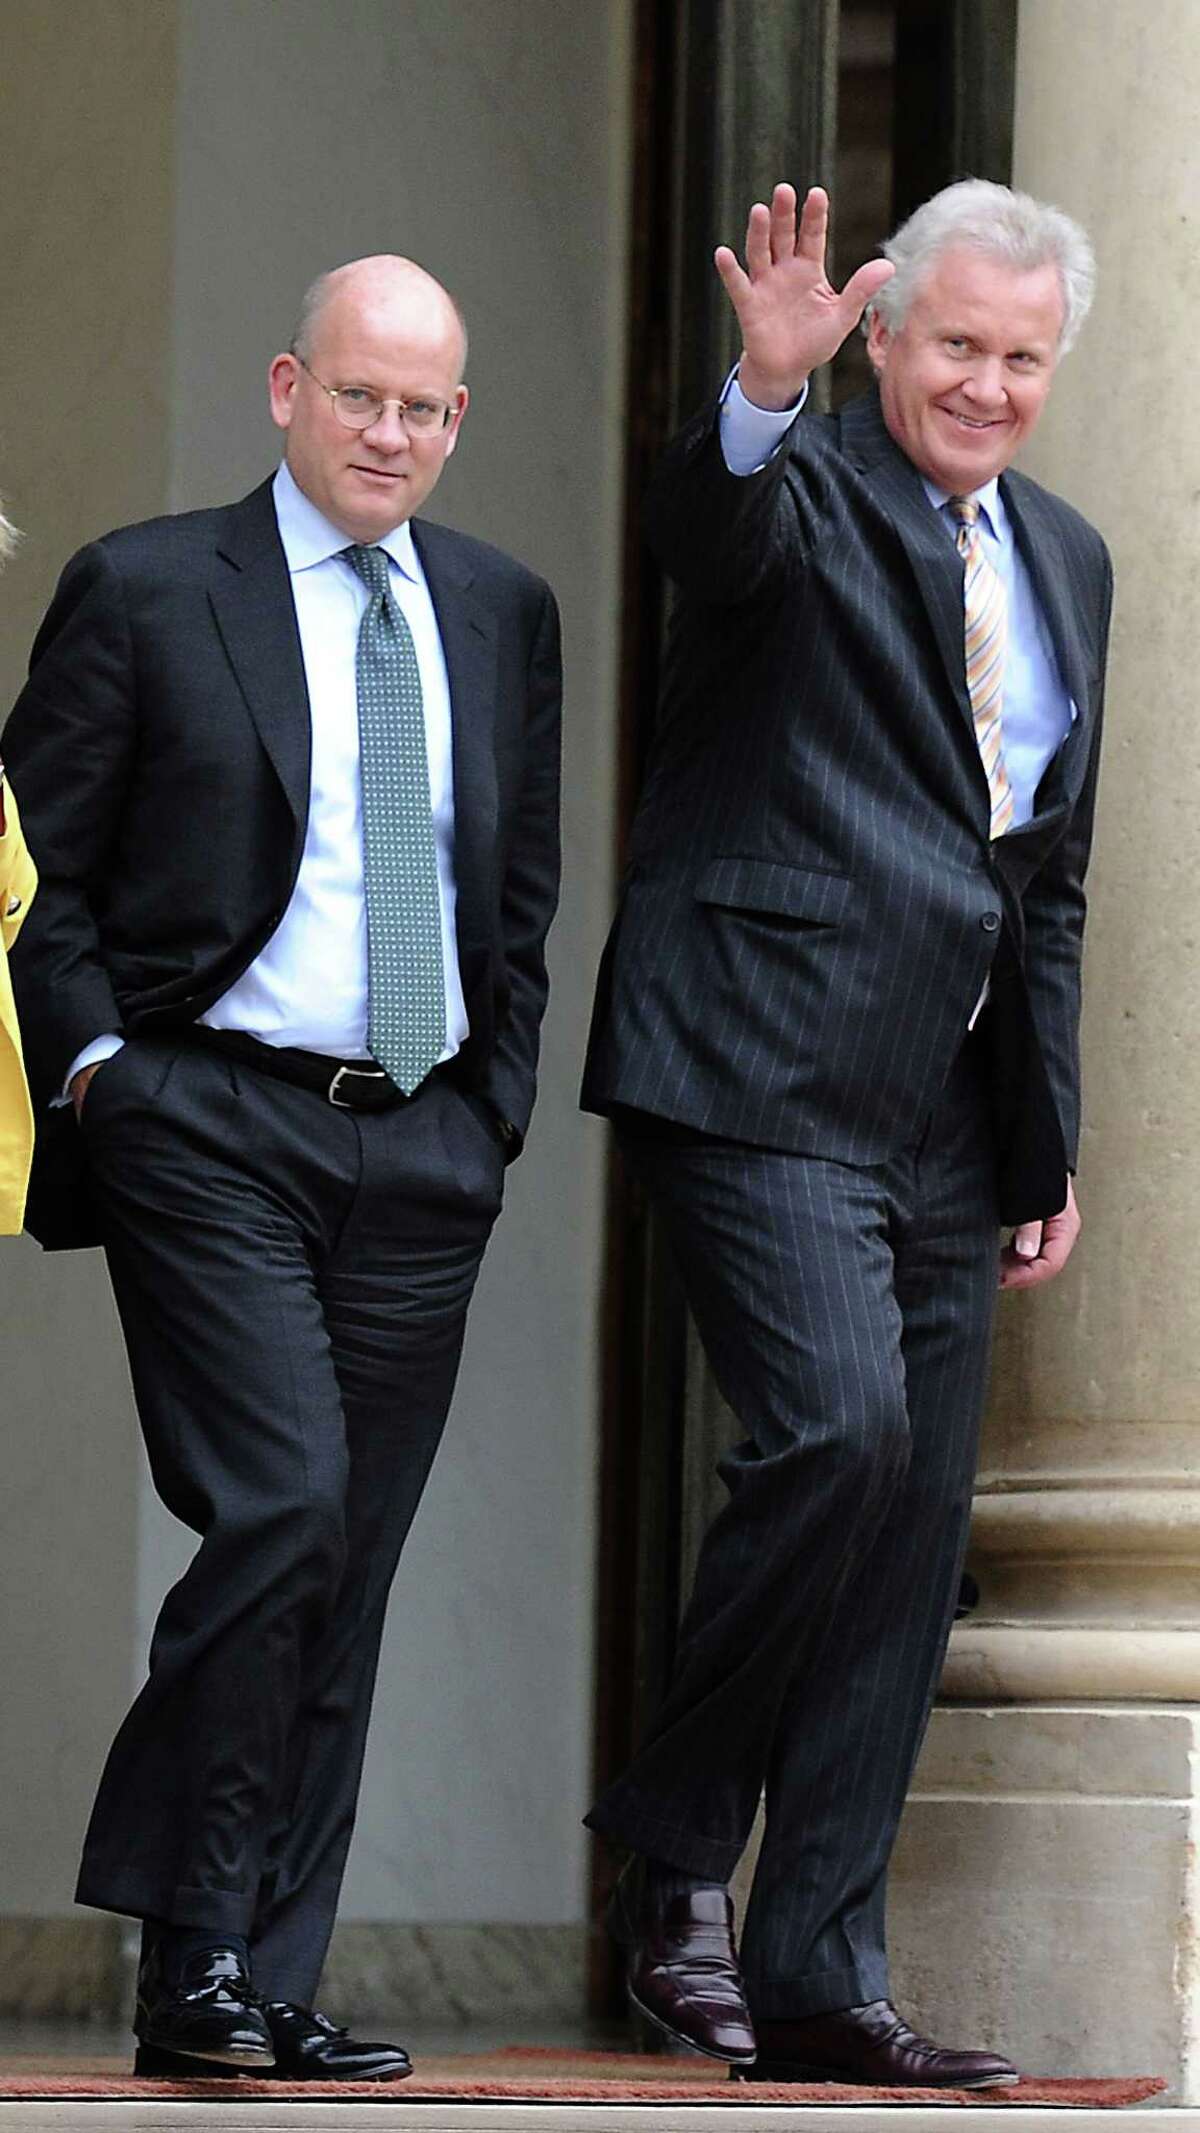 General Electric's chief executive, Jeffrey Immelt, right, is followed in 2014 by a vice president, John Flannery, who will become CEO this summer. ﻿